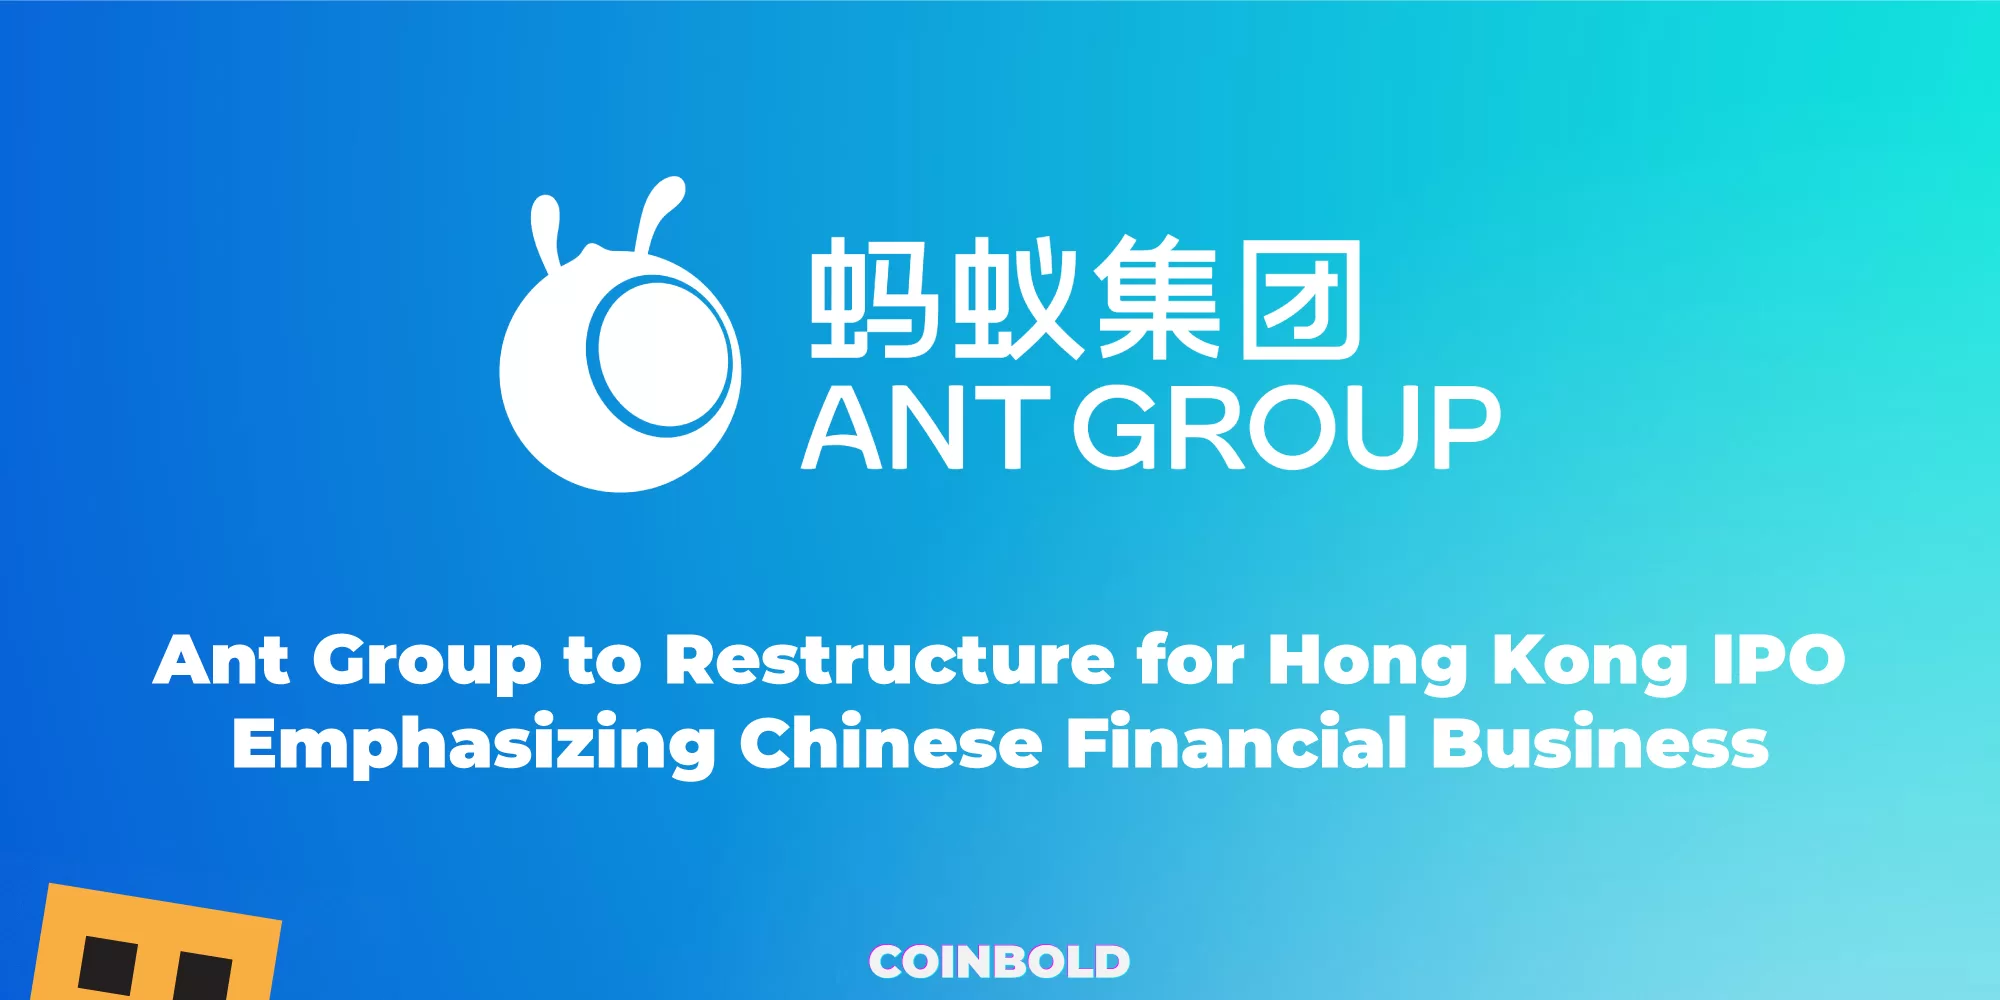 Ant Group to Restructure for Hong Kong IPO, Emphasizing Chinese Financial Business